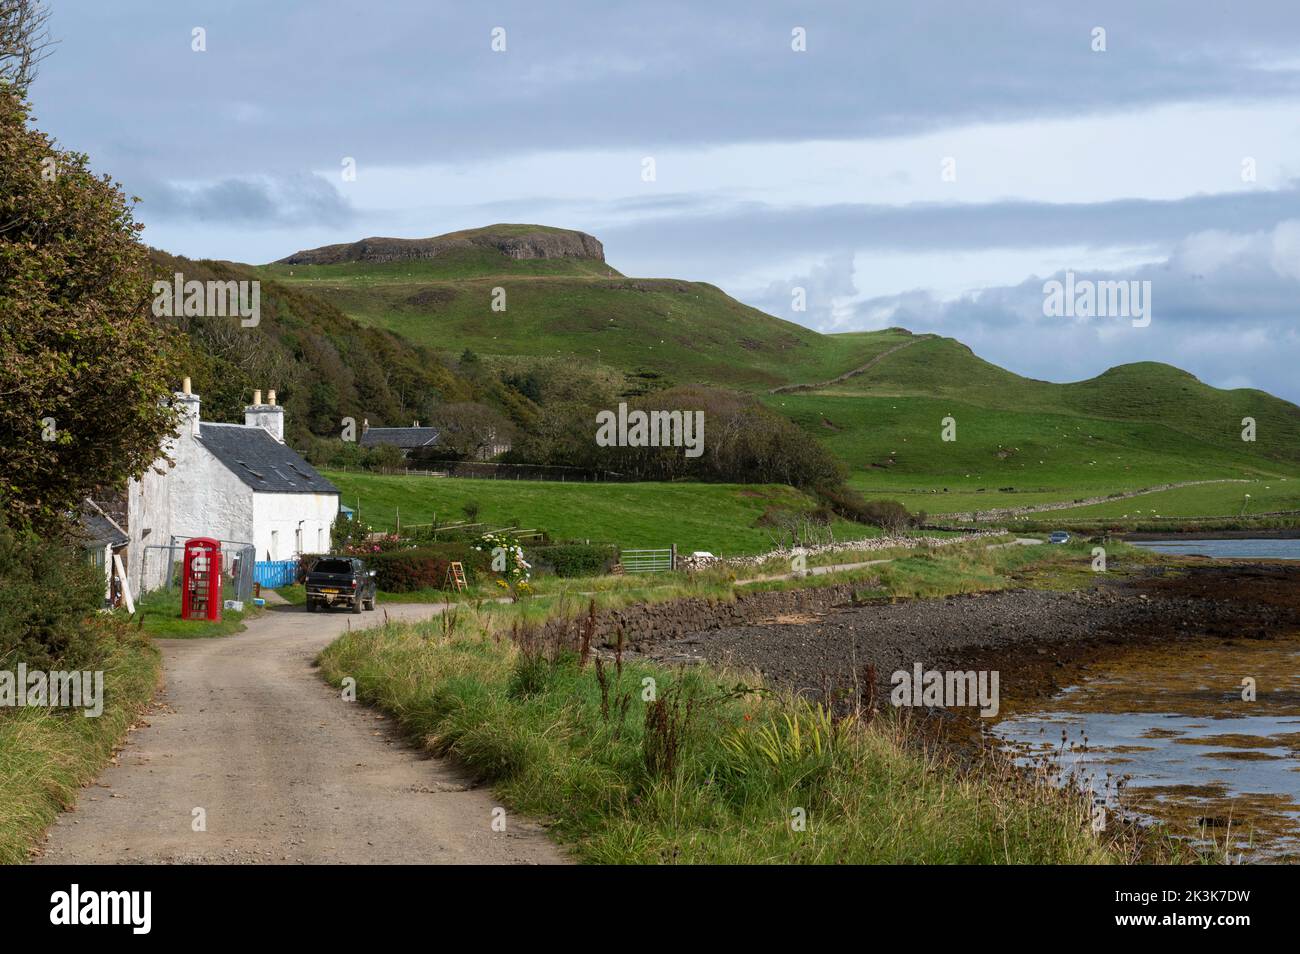 September 2022: Isle of Canna, Inner Hebrides, Scotland The old red phone box and post office on the road along the shore Stock Photo